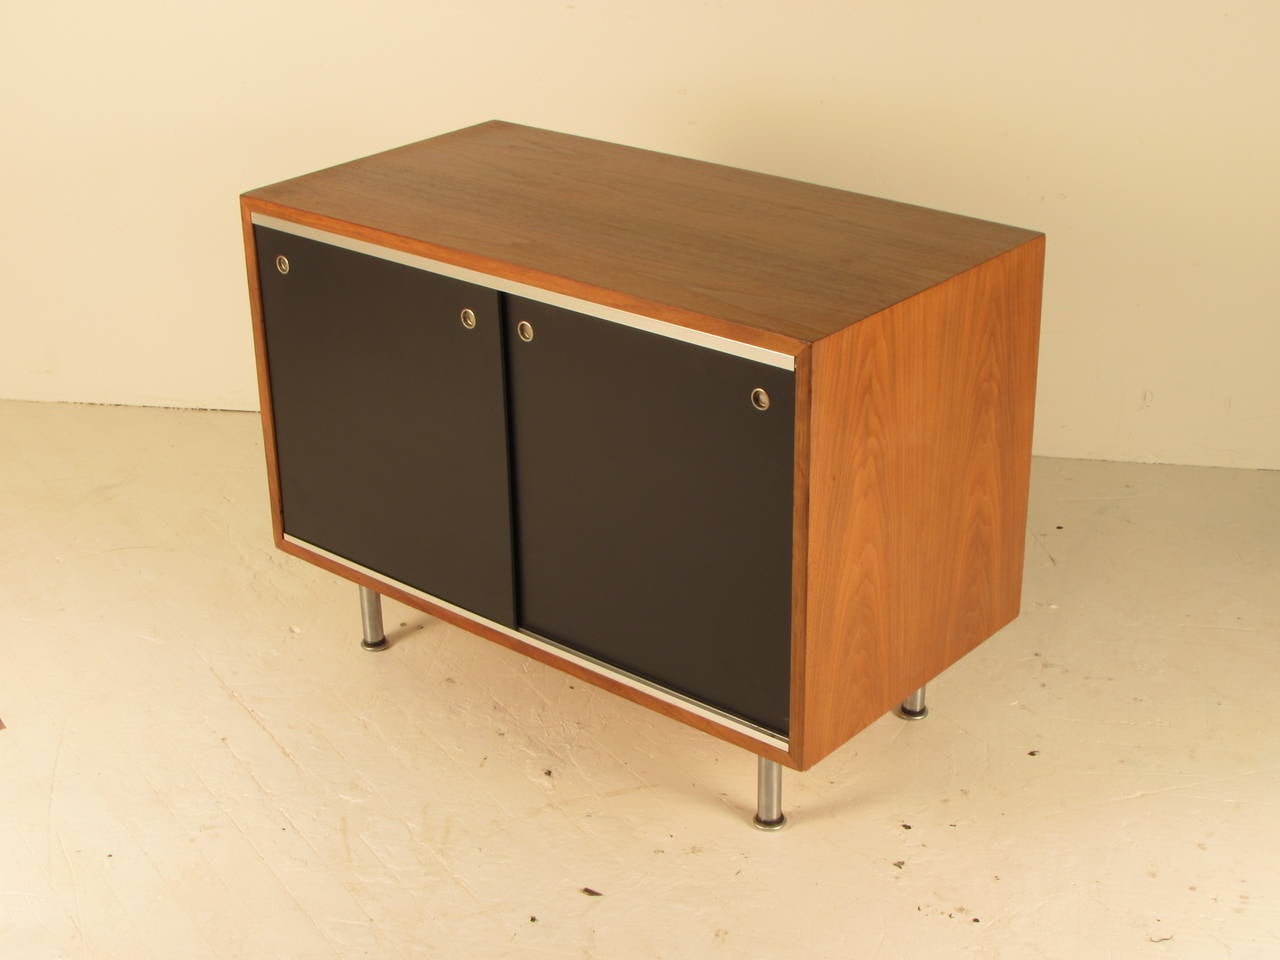 Handsome petite credenza designed by George Nelson for Herman Miller; walnut cabinet with ebonized masonite sliding doors, button pulls and spun aluminum legs. Walnut has just been fully refinished and the entirecabinet shows beautifully.